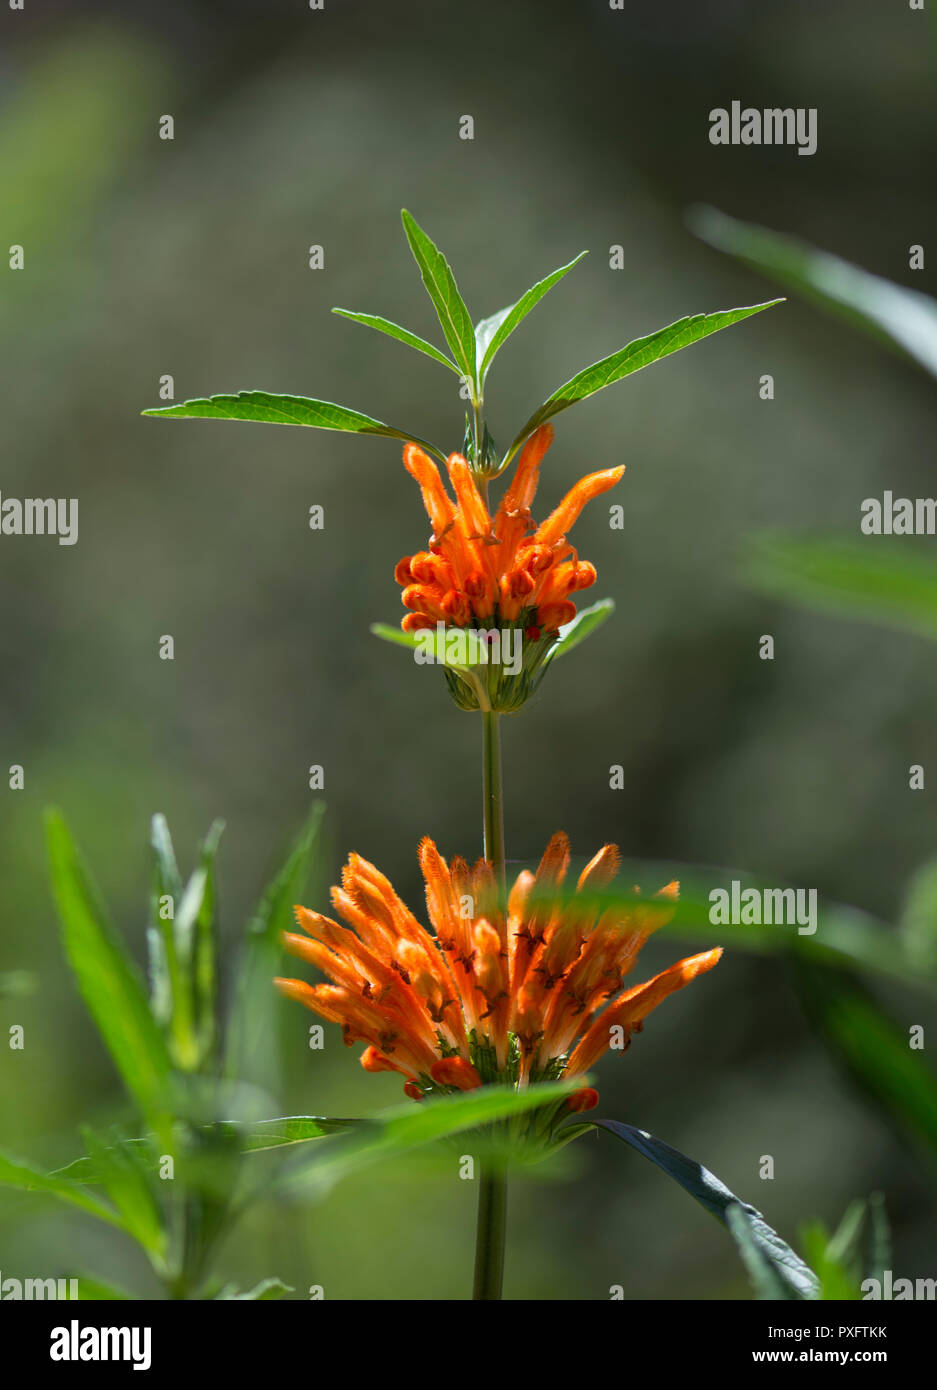 The Lion's Ear - Shallow focus, consentrating on the strange flowers that look like fuzzy orange fingers. Part of the mint fmaily. Stock Photo